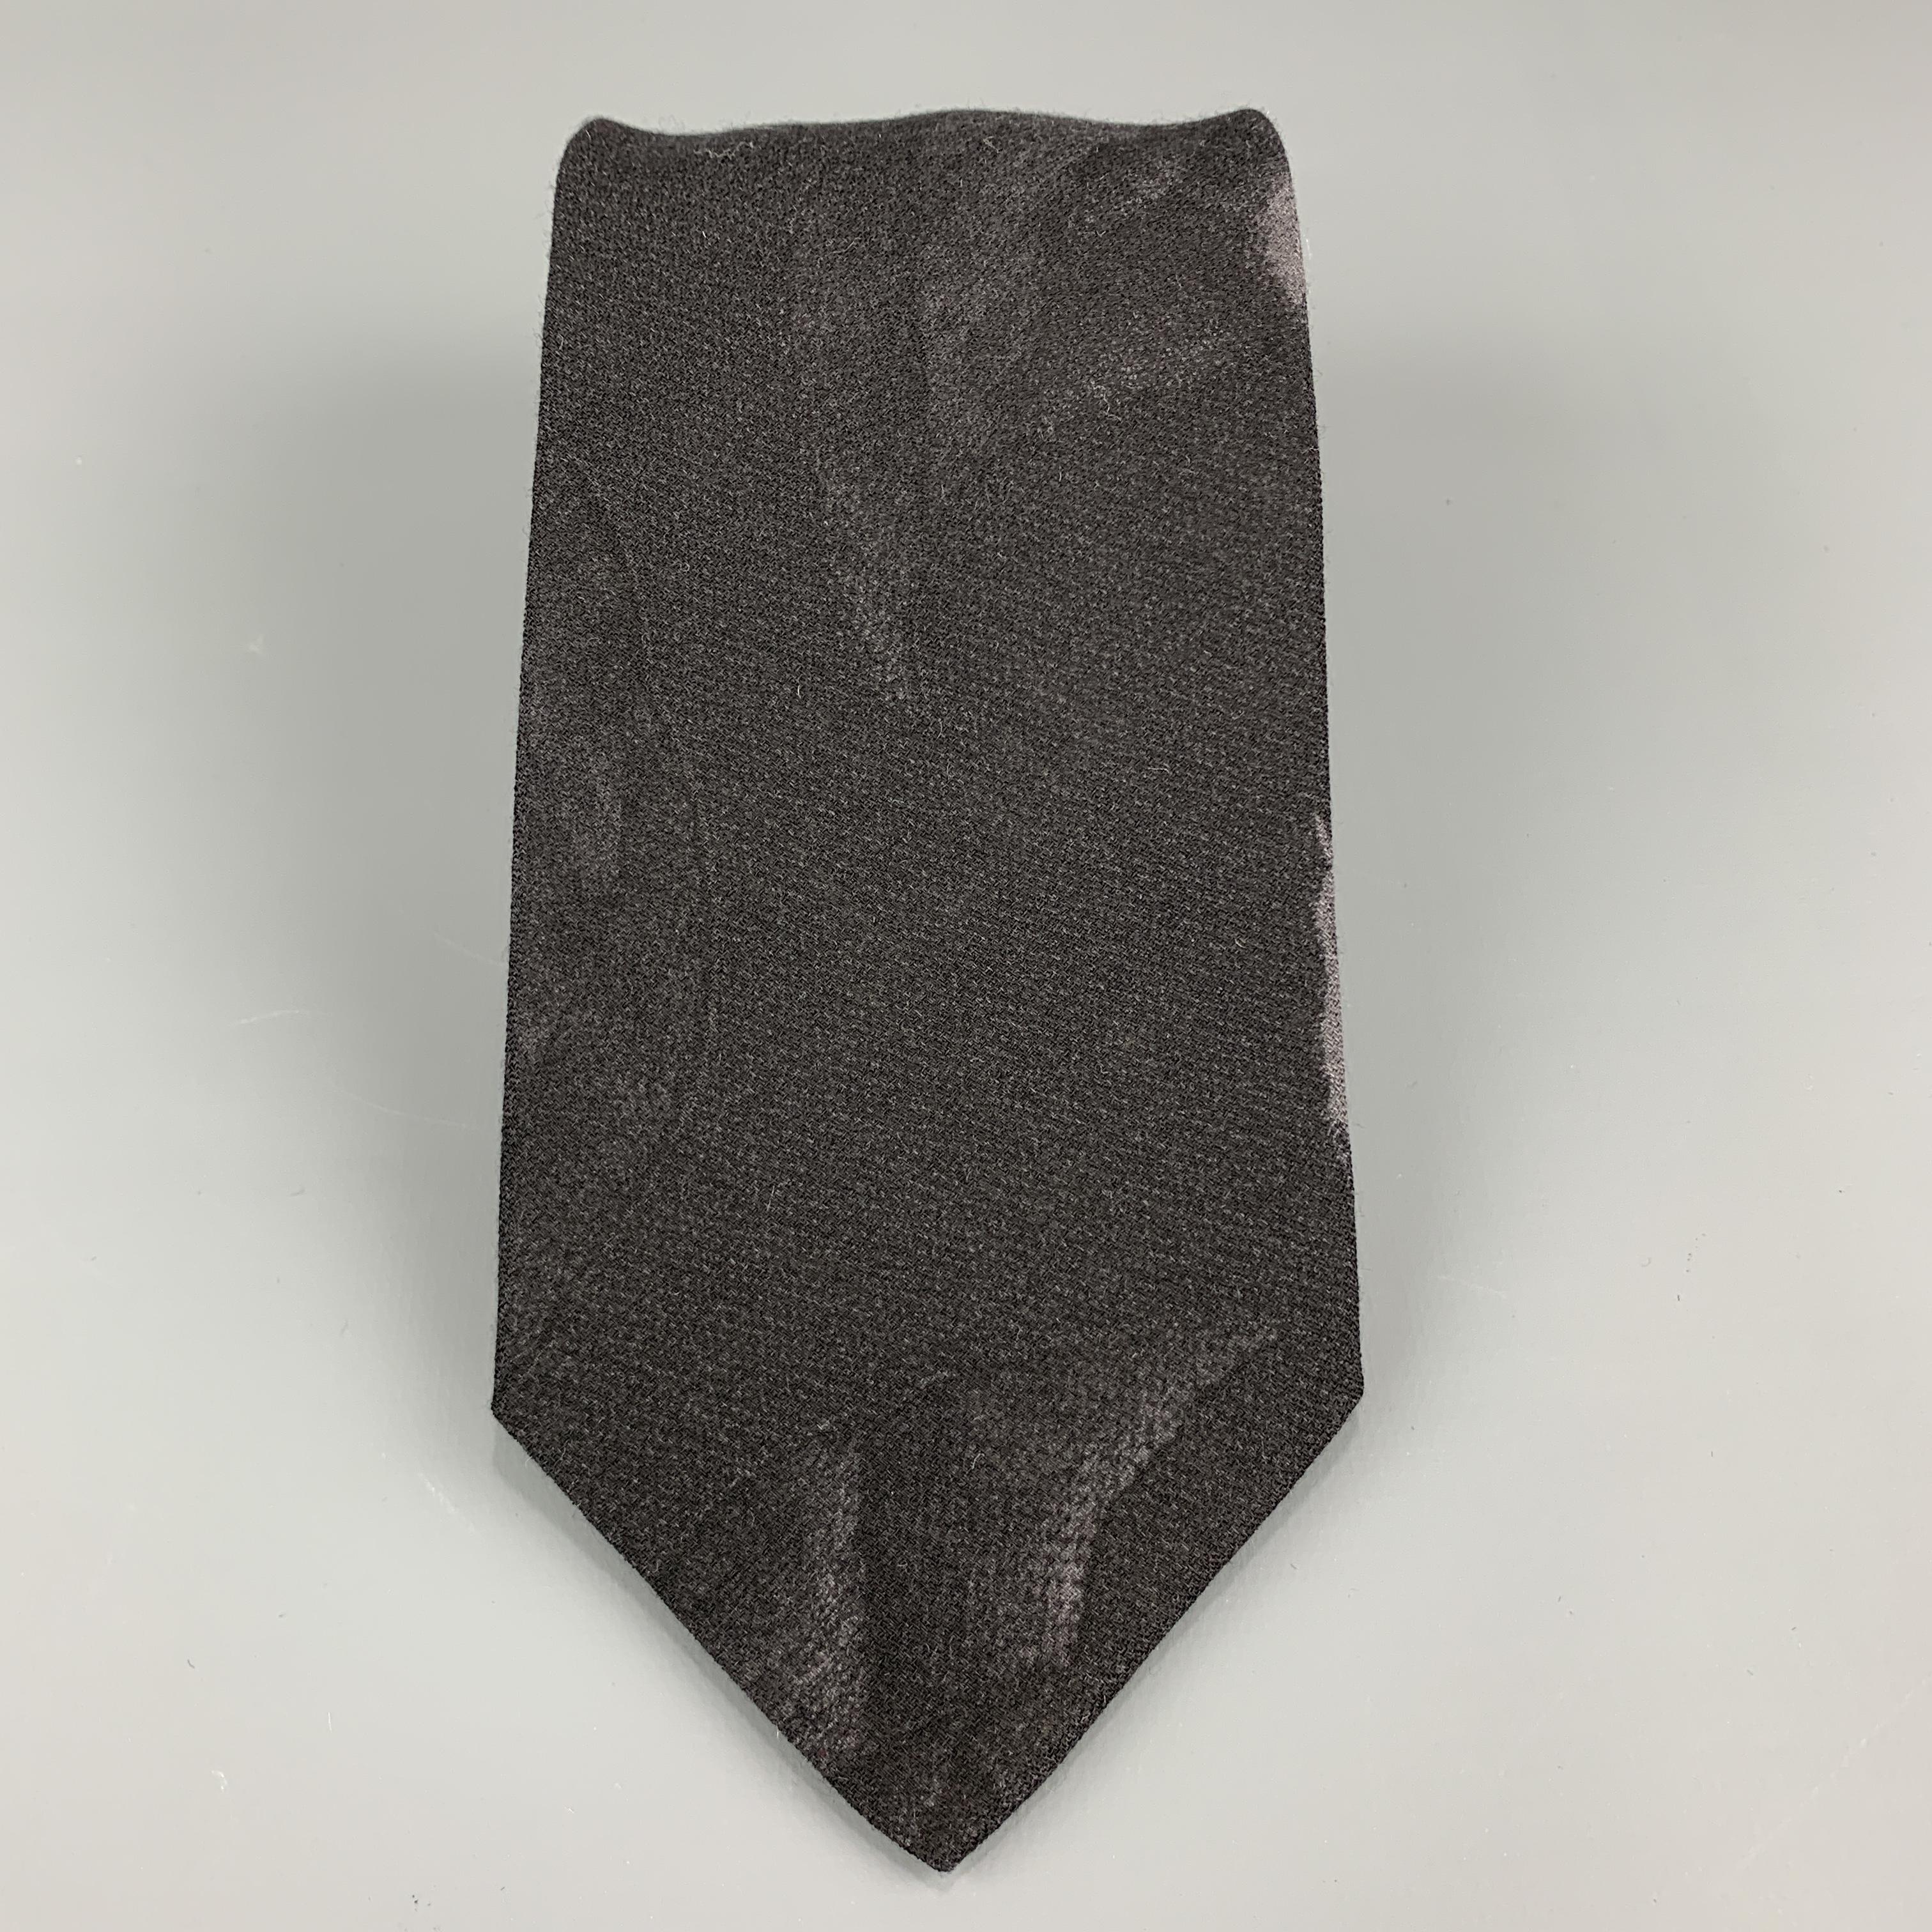 GIORGIO ARMANI necktie comes in black wool blend crepe with all over abstract floral print. Made in Italy.

New with Tags.

Width: 4 in.